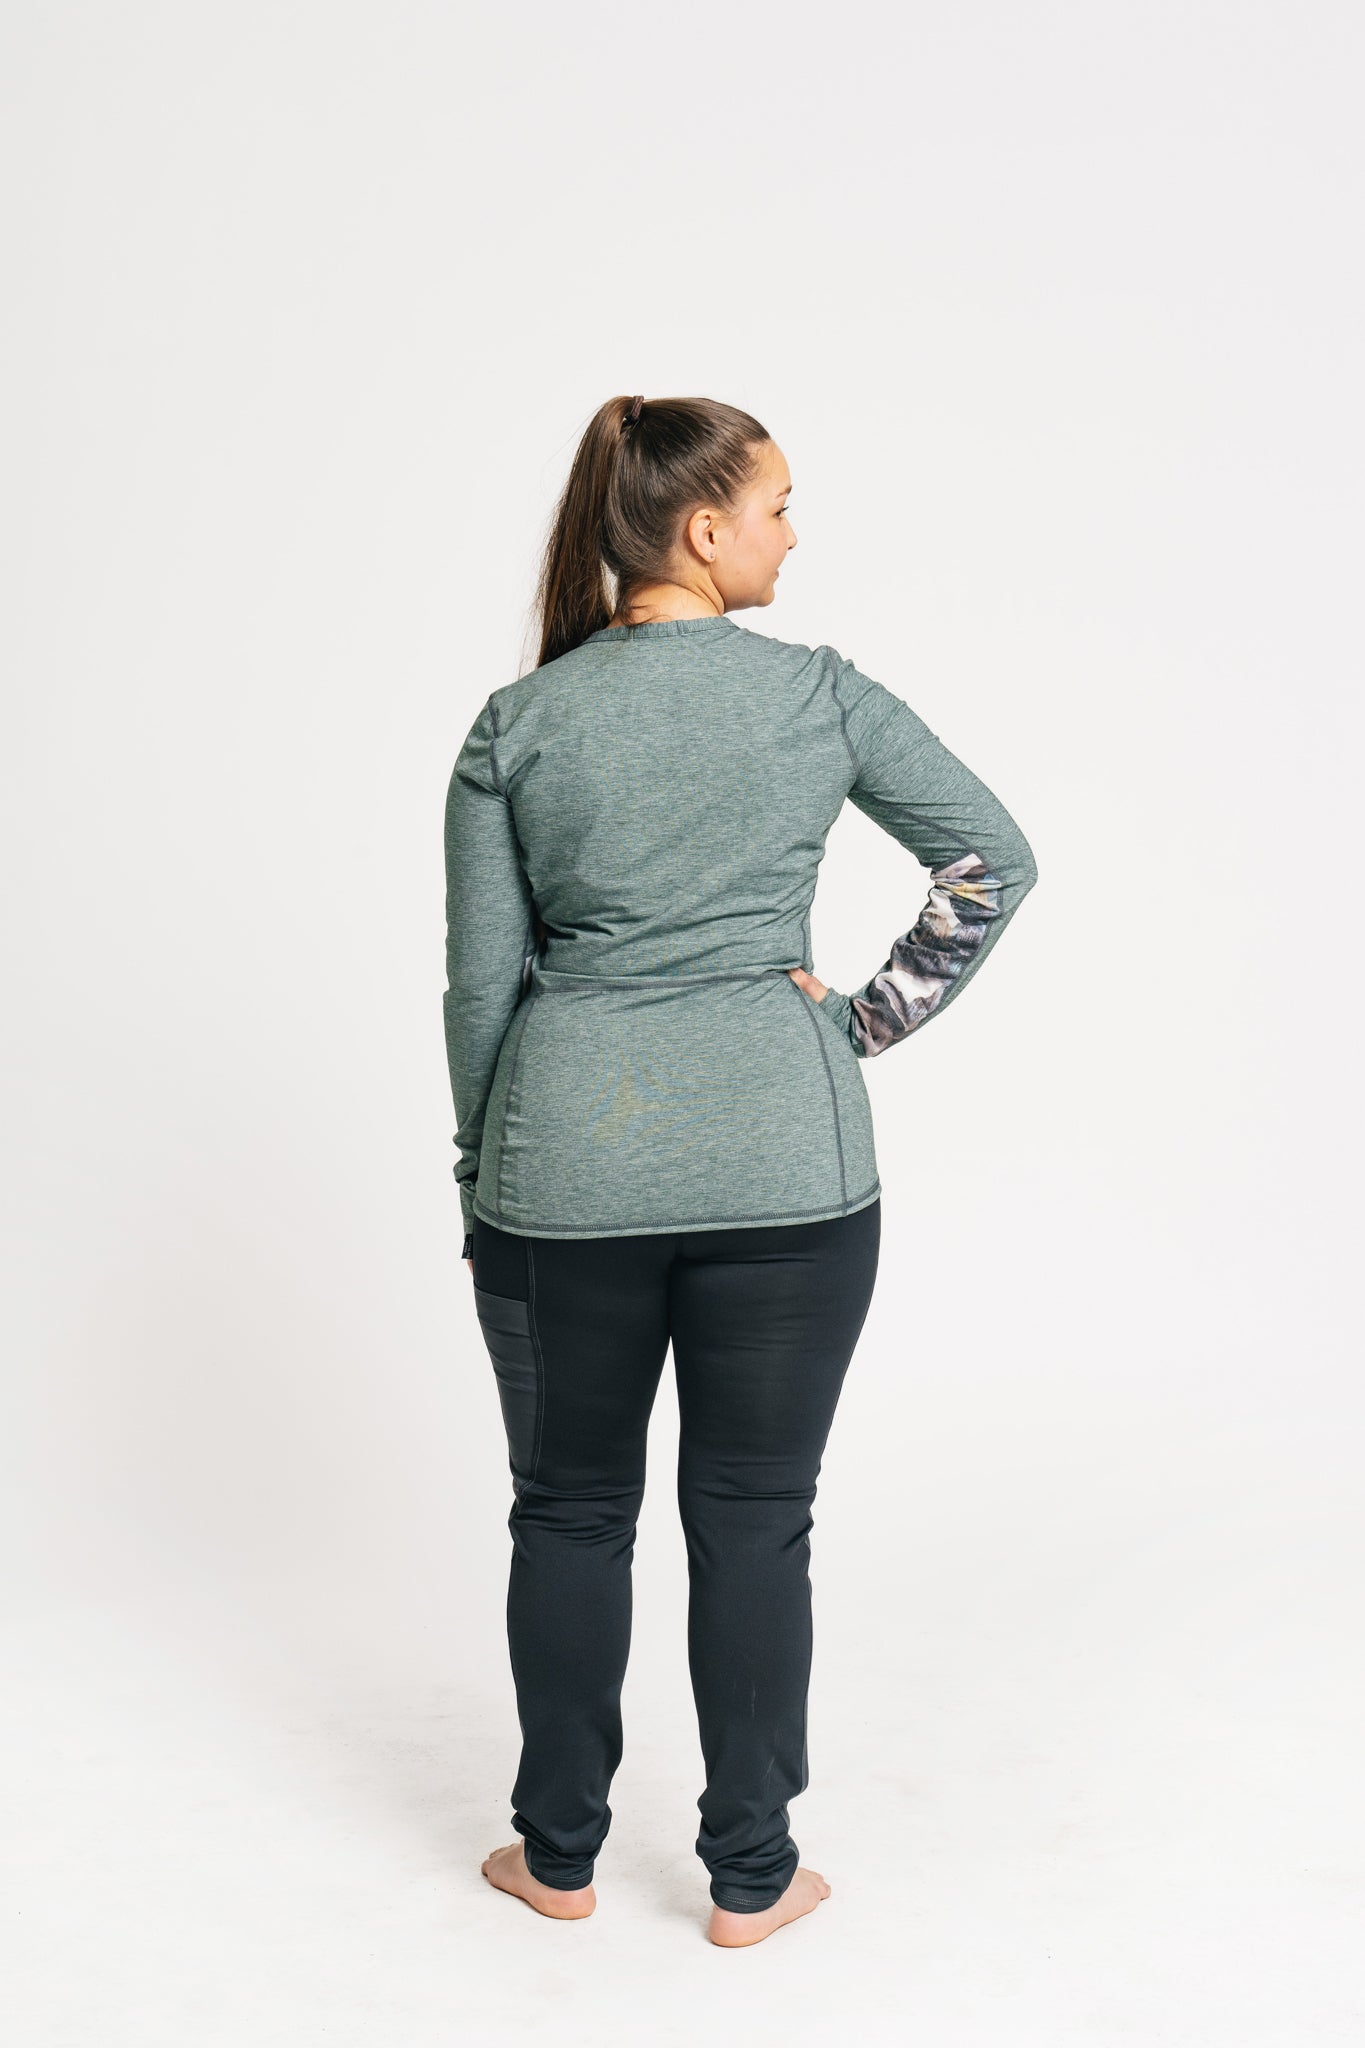 alpine fit hiking leggings on model from behind